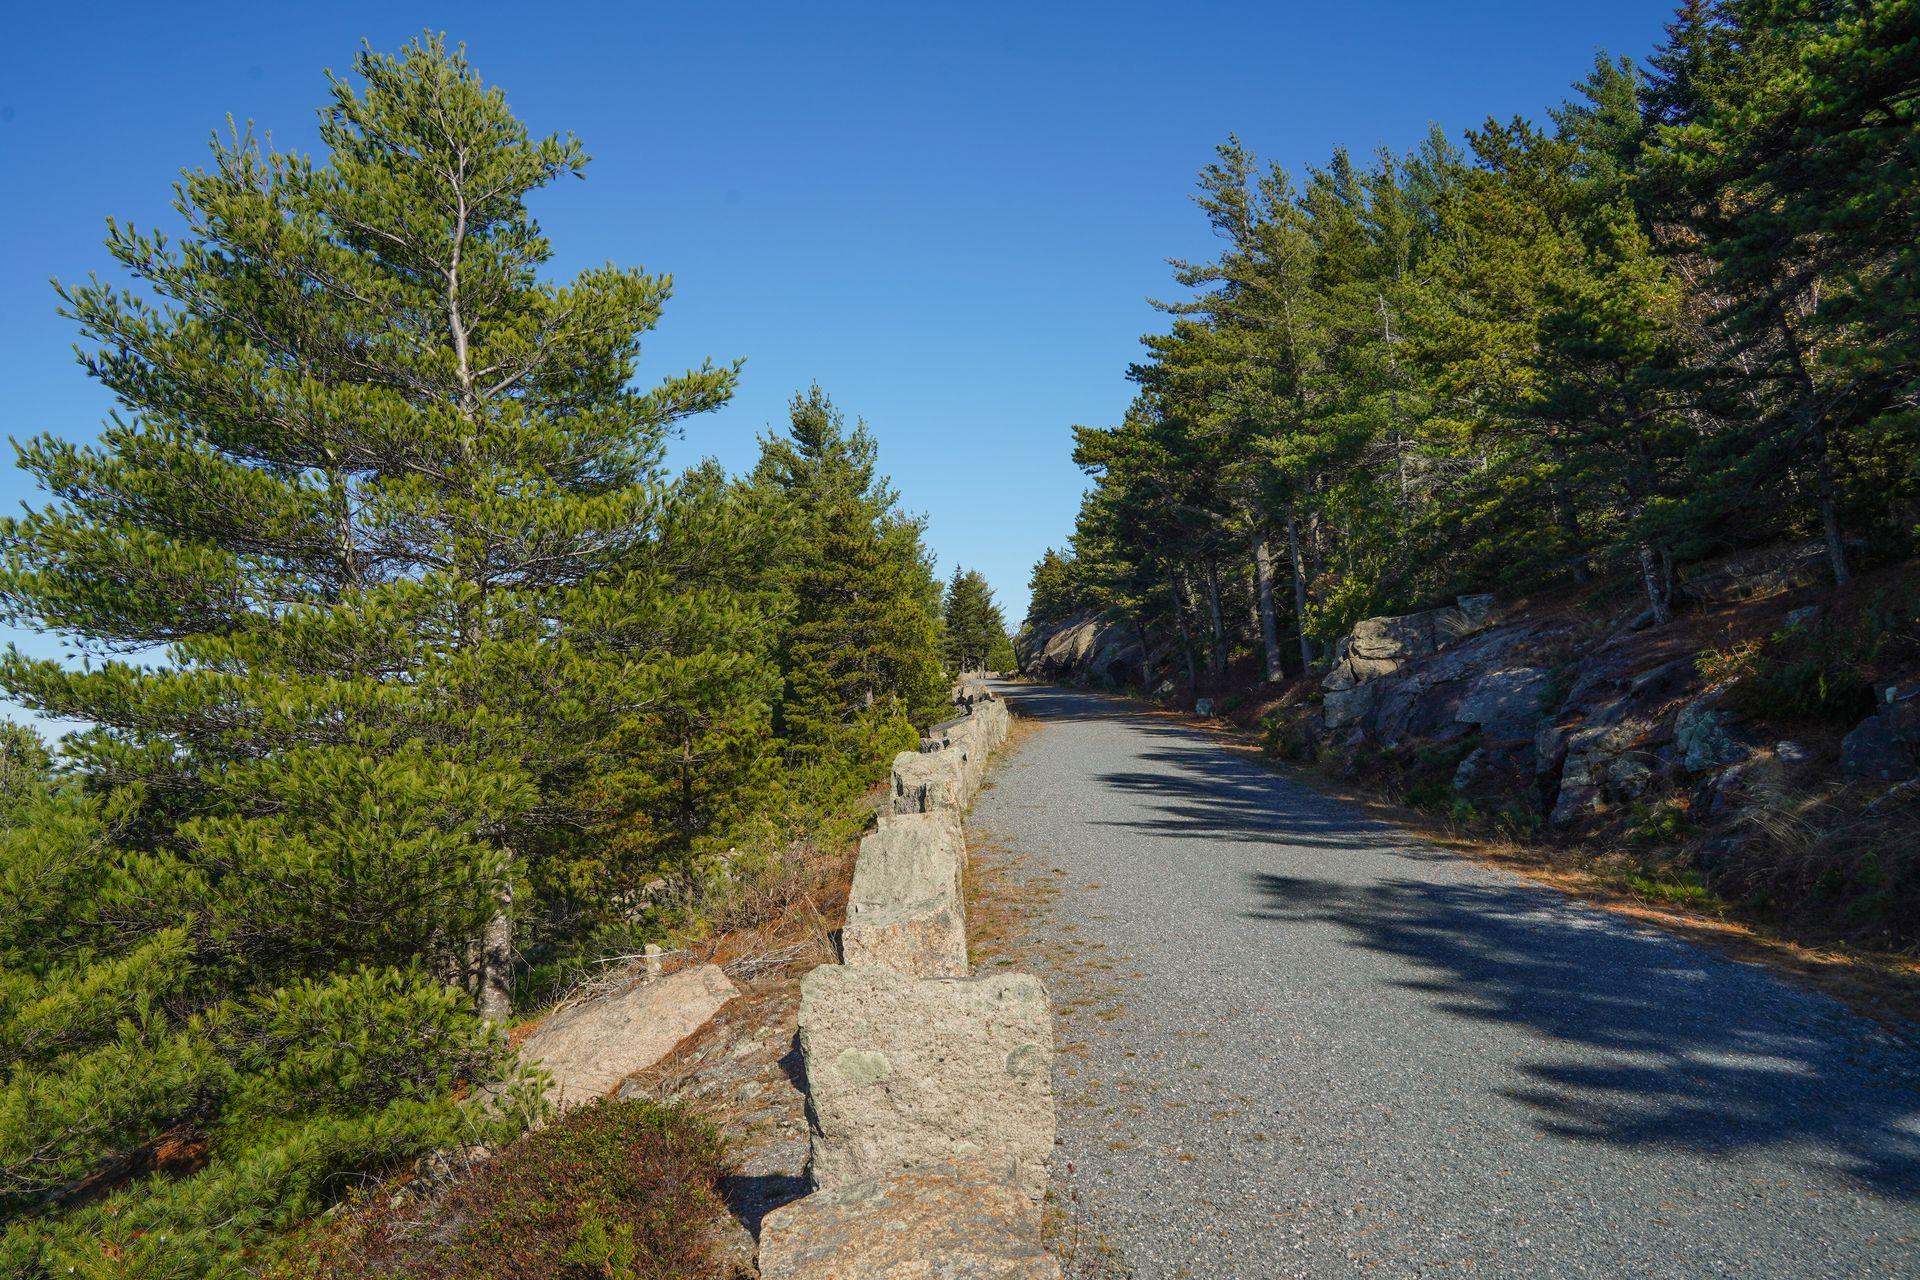 A carriage road in Acadia. The road is relatively wide, made with smooth gravel and is lined by large boulders. There are trees on either side of the path.